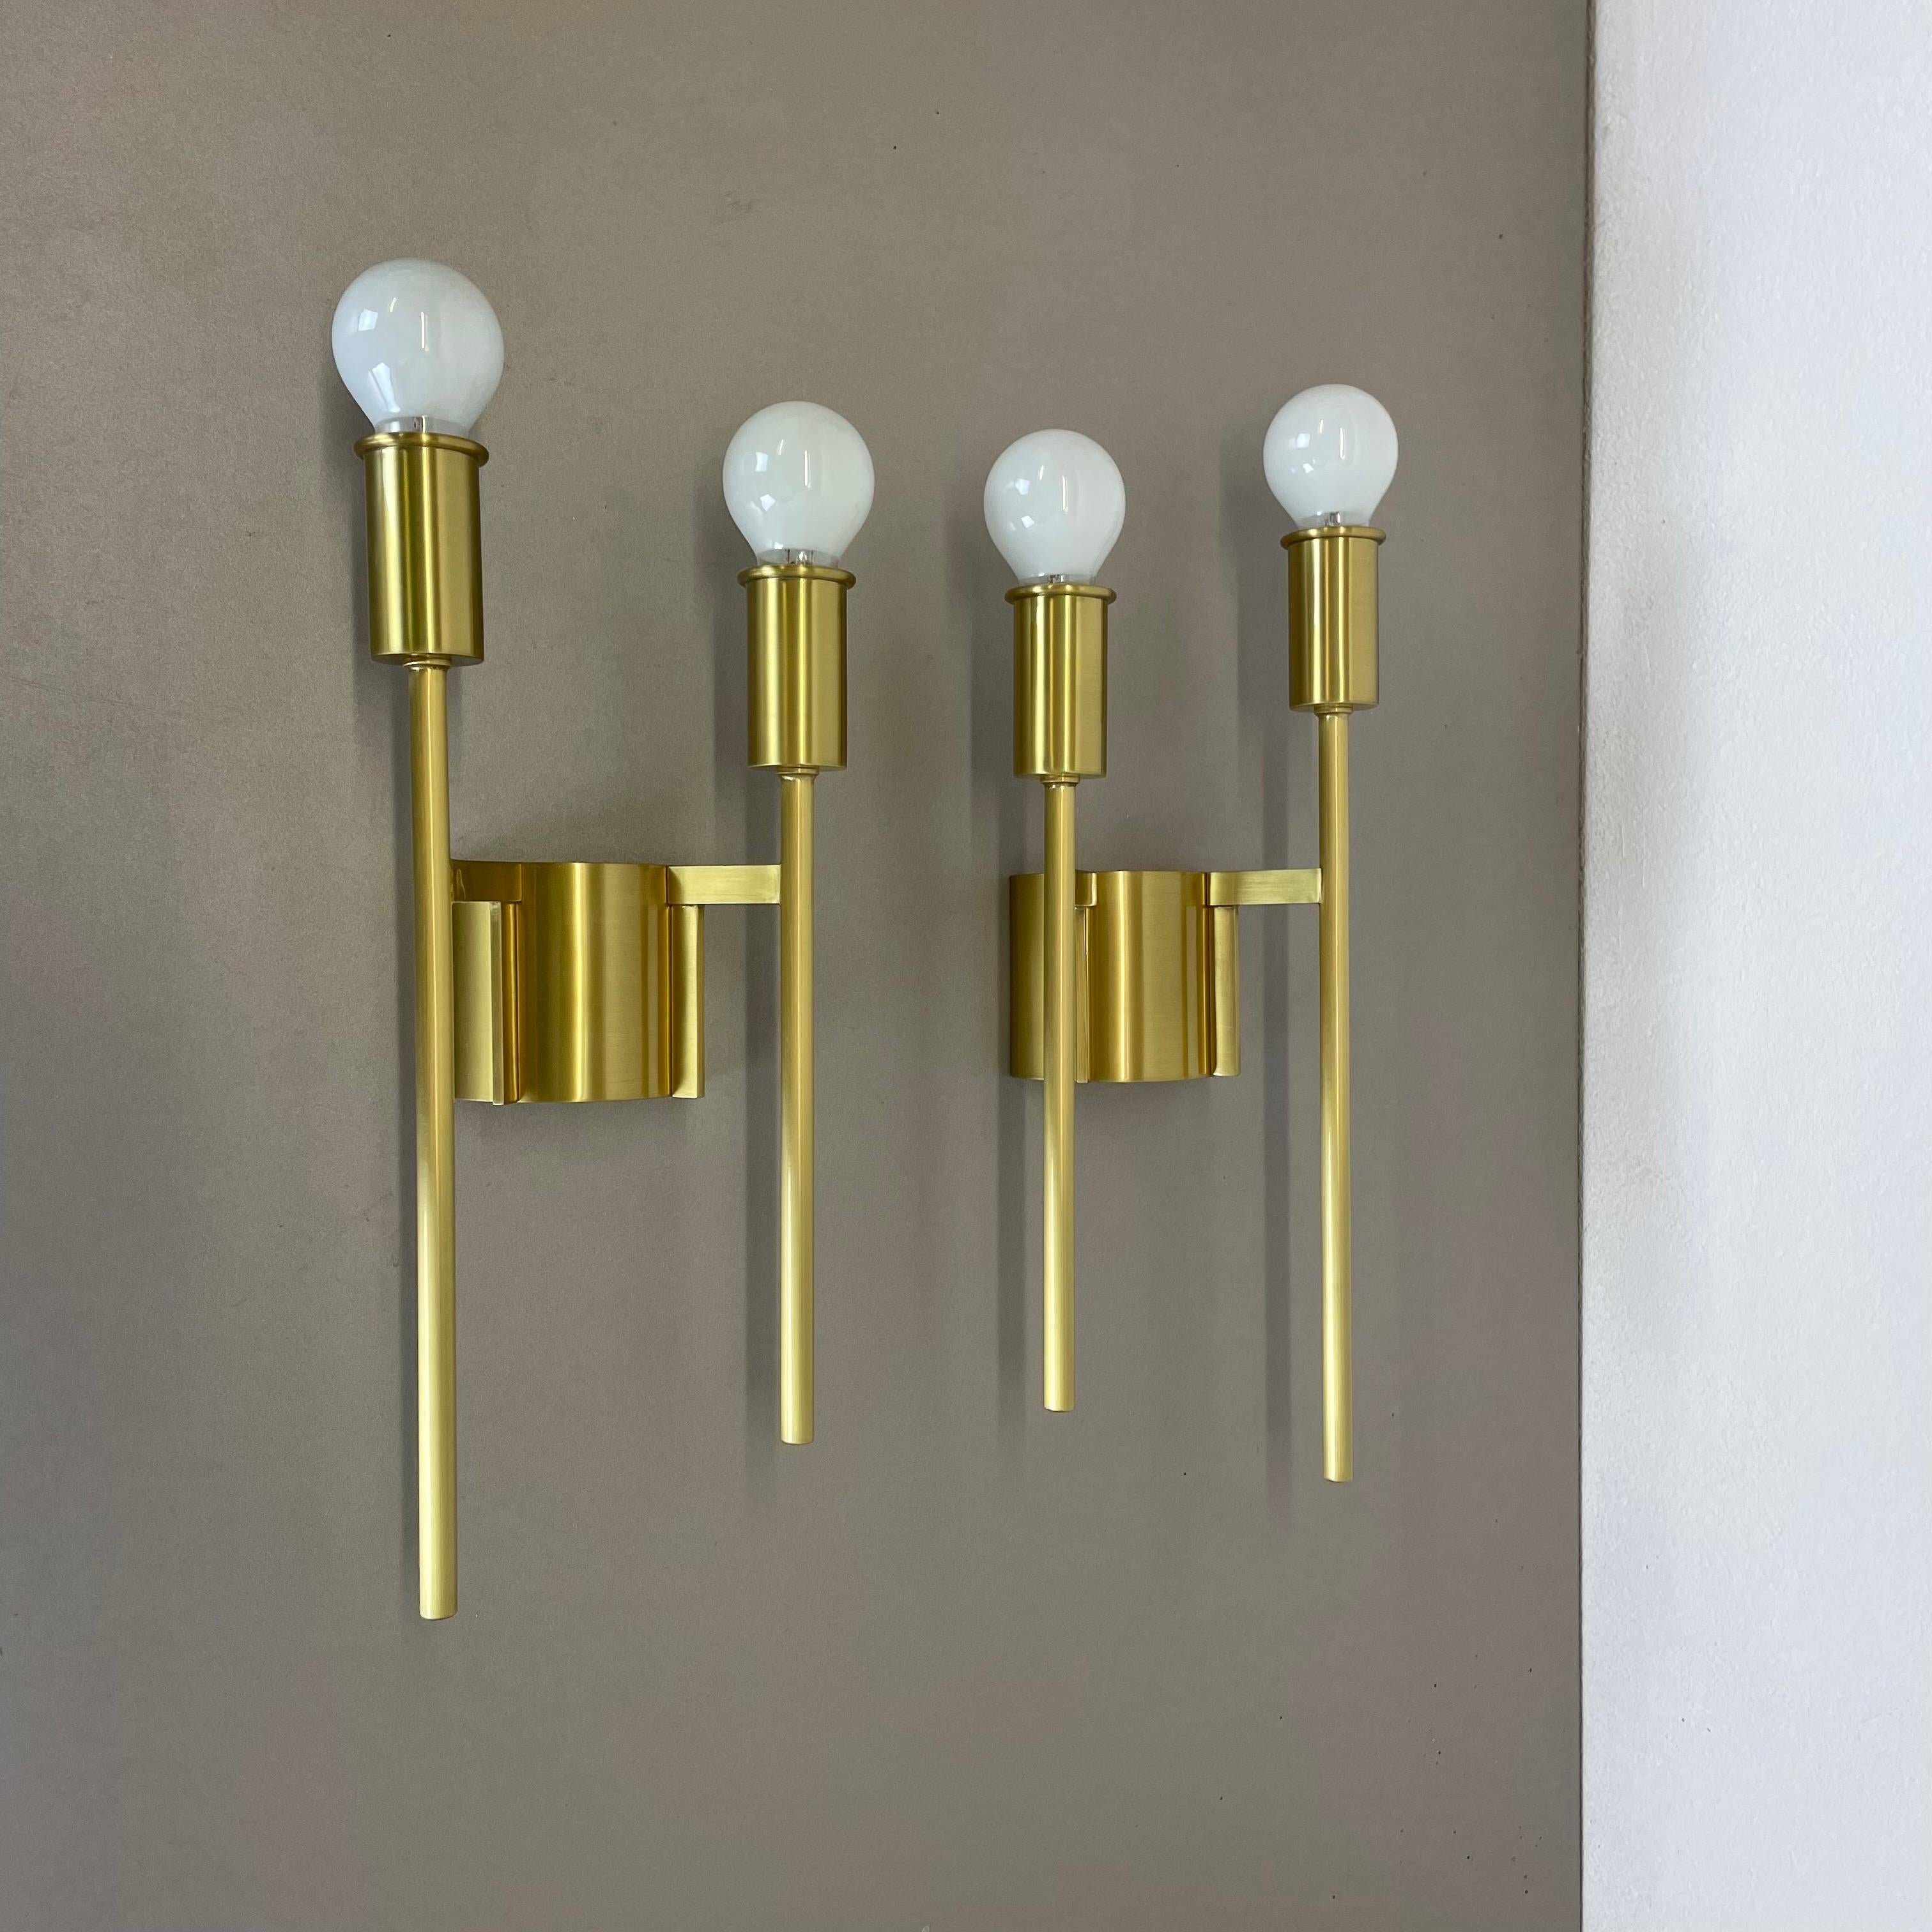 Article:

Wall light, set of 2


Origin:

Italy in the manner of Stilnovo, Gio Ponti



Age:

1970s



This modernist light set was produced in Italy in the 1970s in Italy. It is made of brass and features a very unique and unusual Brutalist form